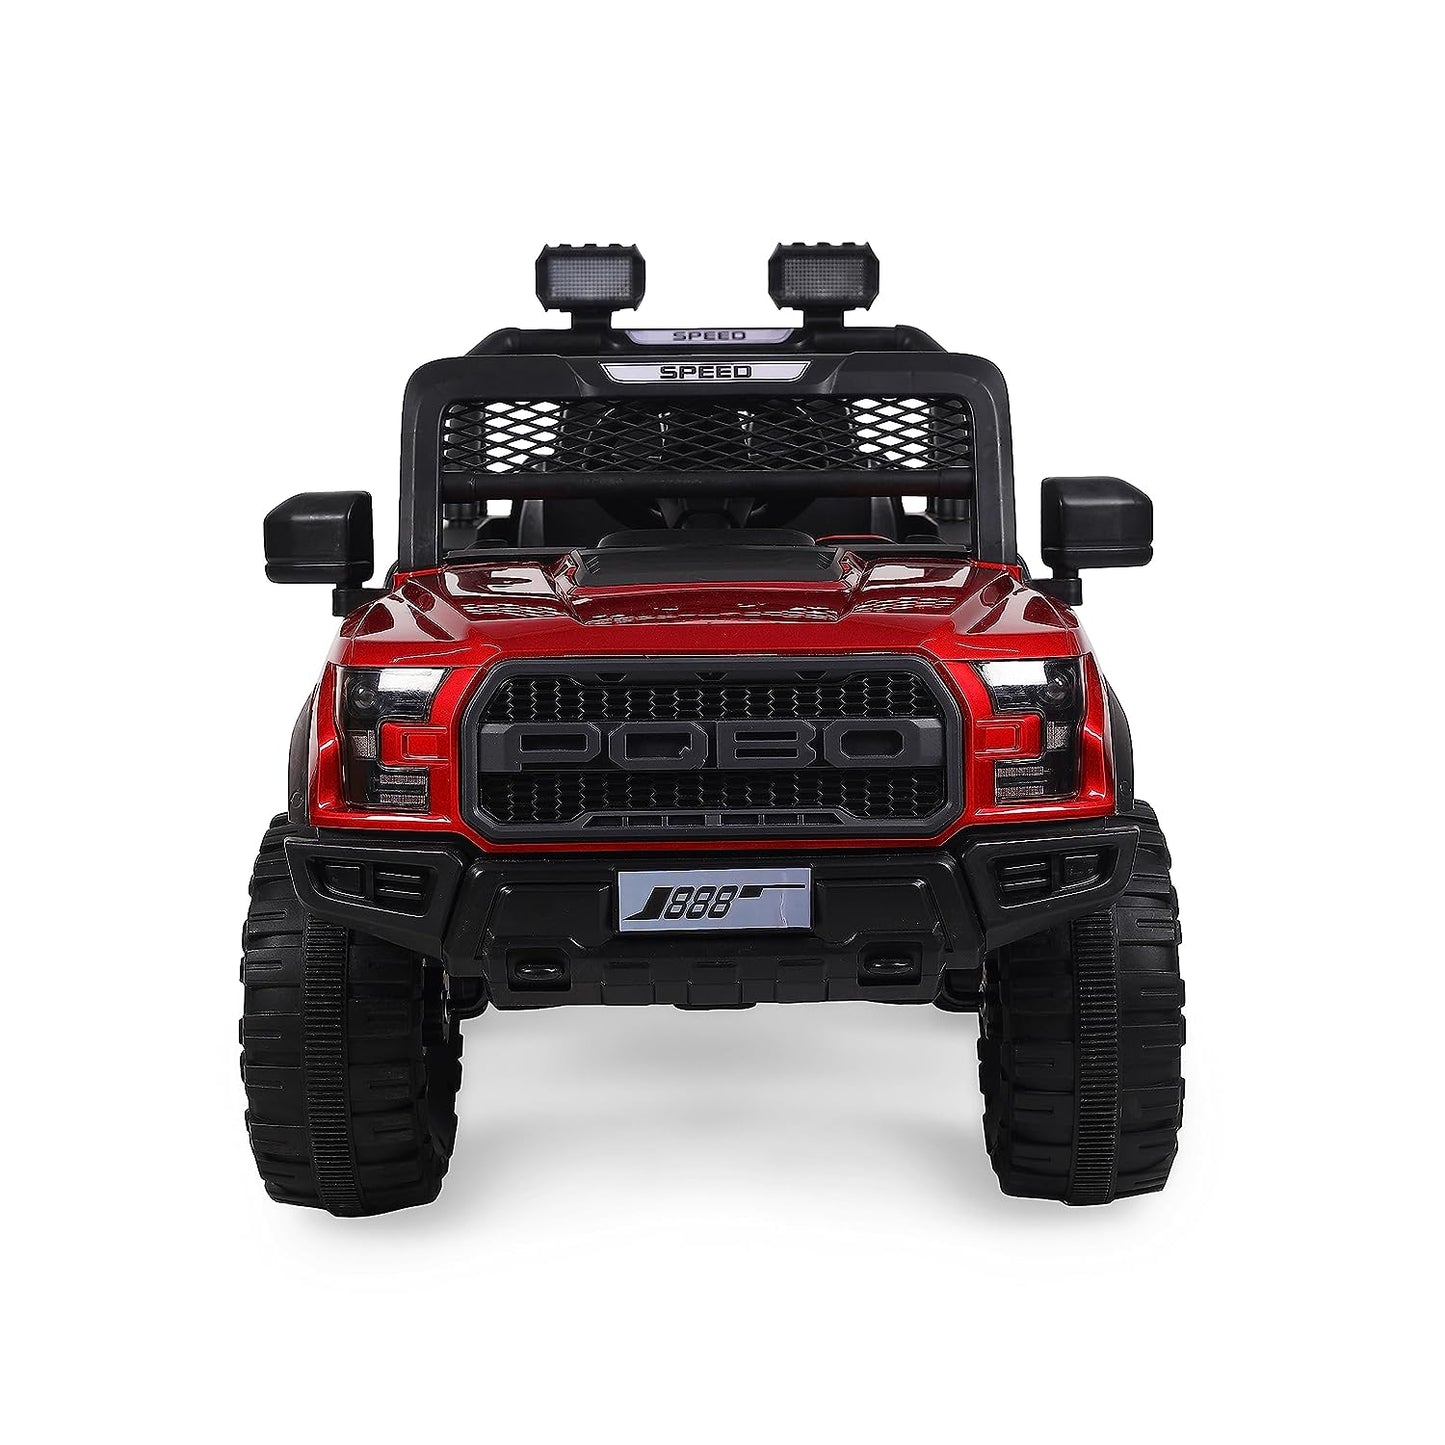 GettBoles Electric Battery Operated Ride on Jeep for Kids of Age 2 to 6 Years- The Metallic Painted Driving Ride on Car with Music, Lights and Bluetooth Remote Control (Red)